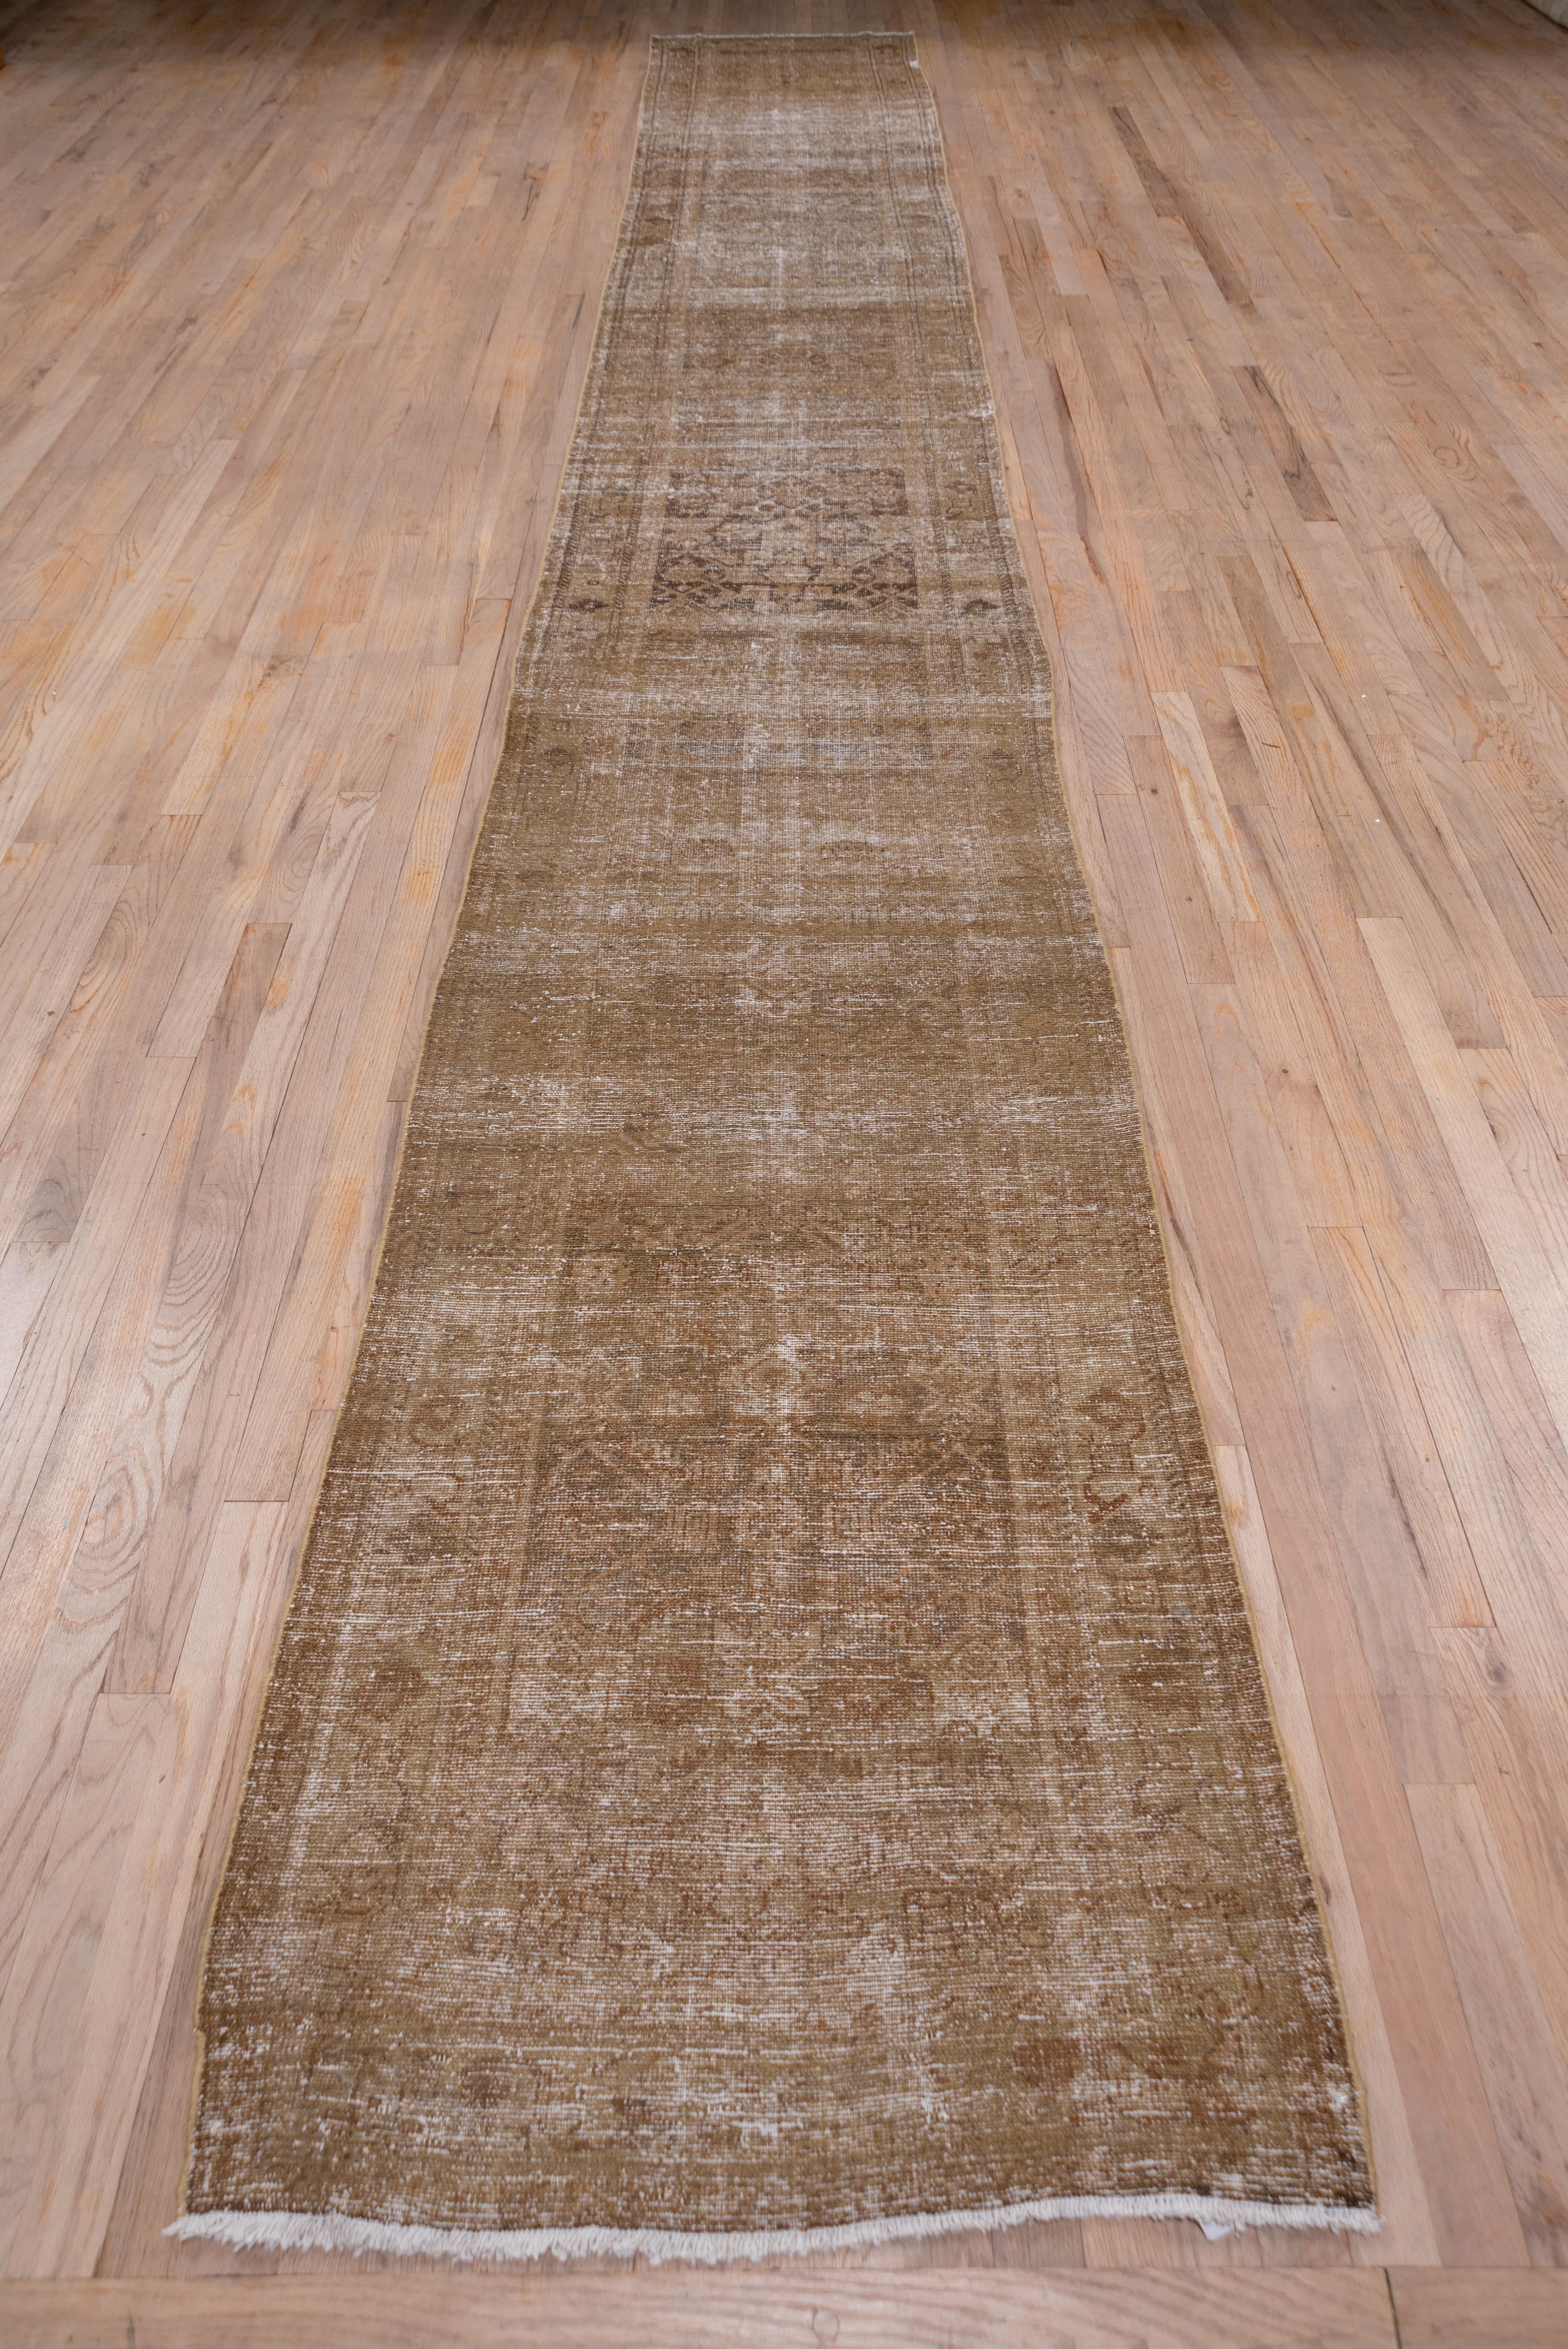 This rather severely all-over worn west Persian village runner shows a bi tonal palette of light and medium warm brown in a typical Herati pattern. The field abrashes to a darker brown near the centre.